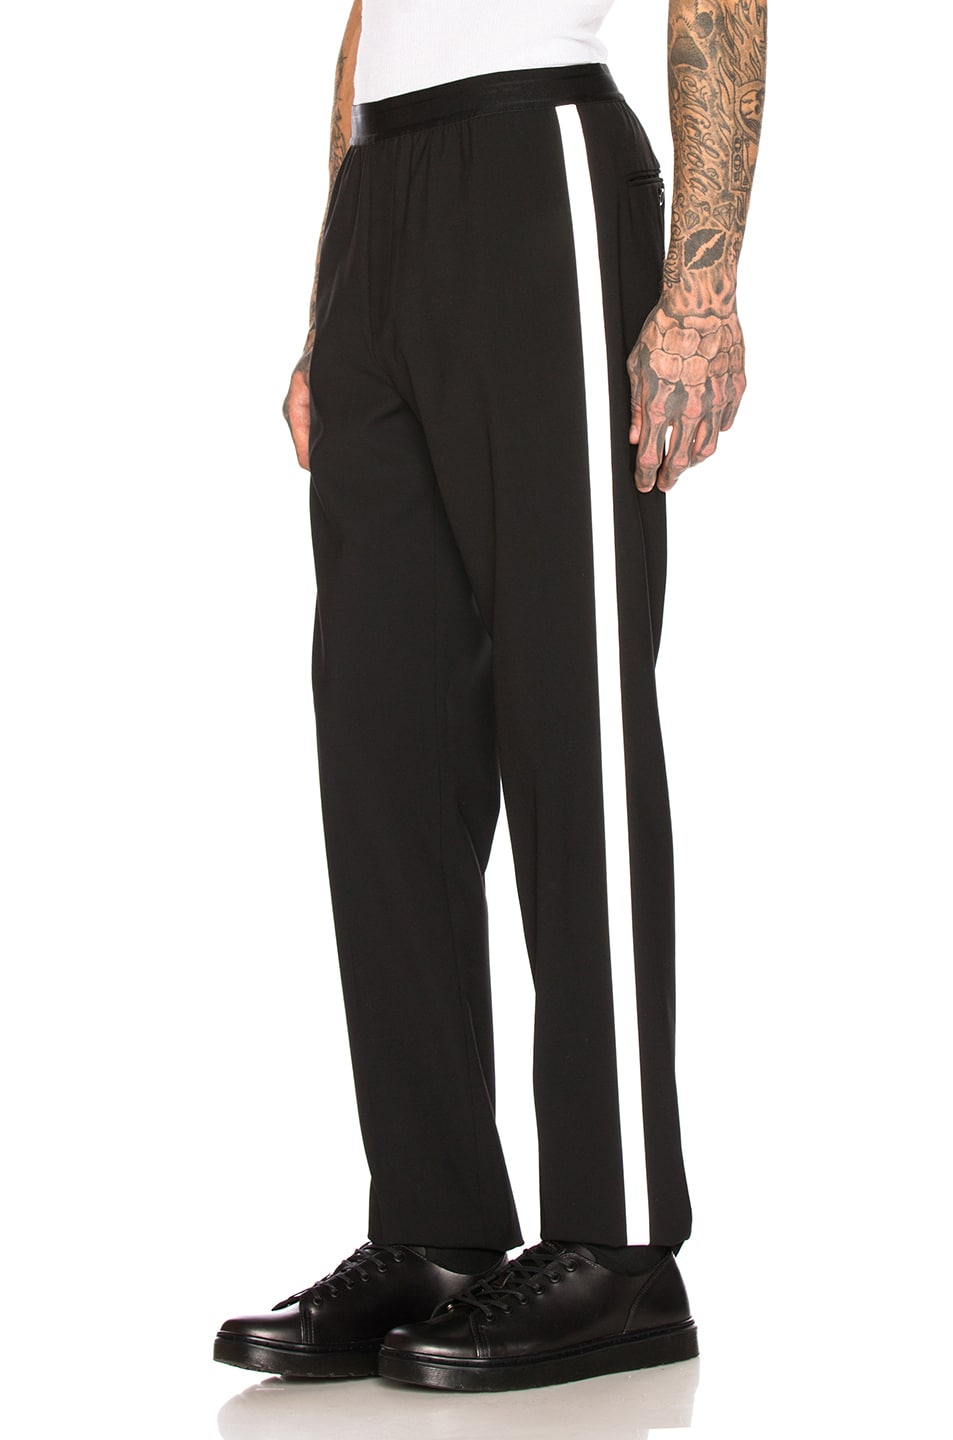 Helmut Lang Band Pull On Pant in Black & Silver | FWRD